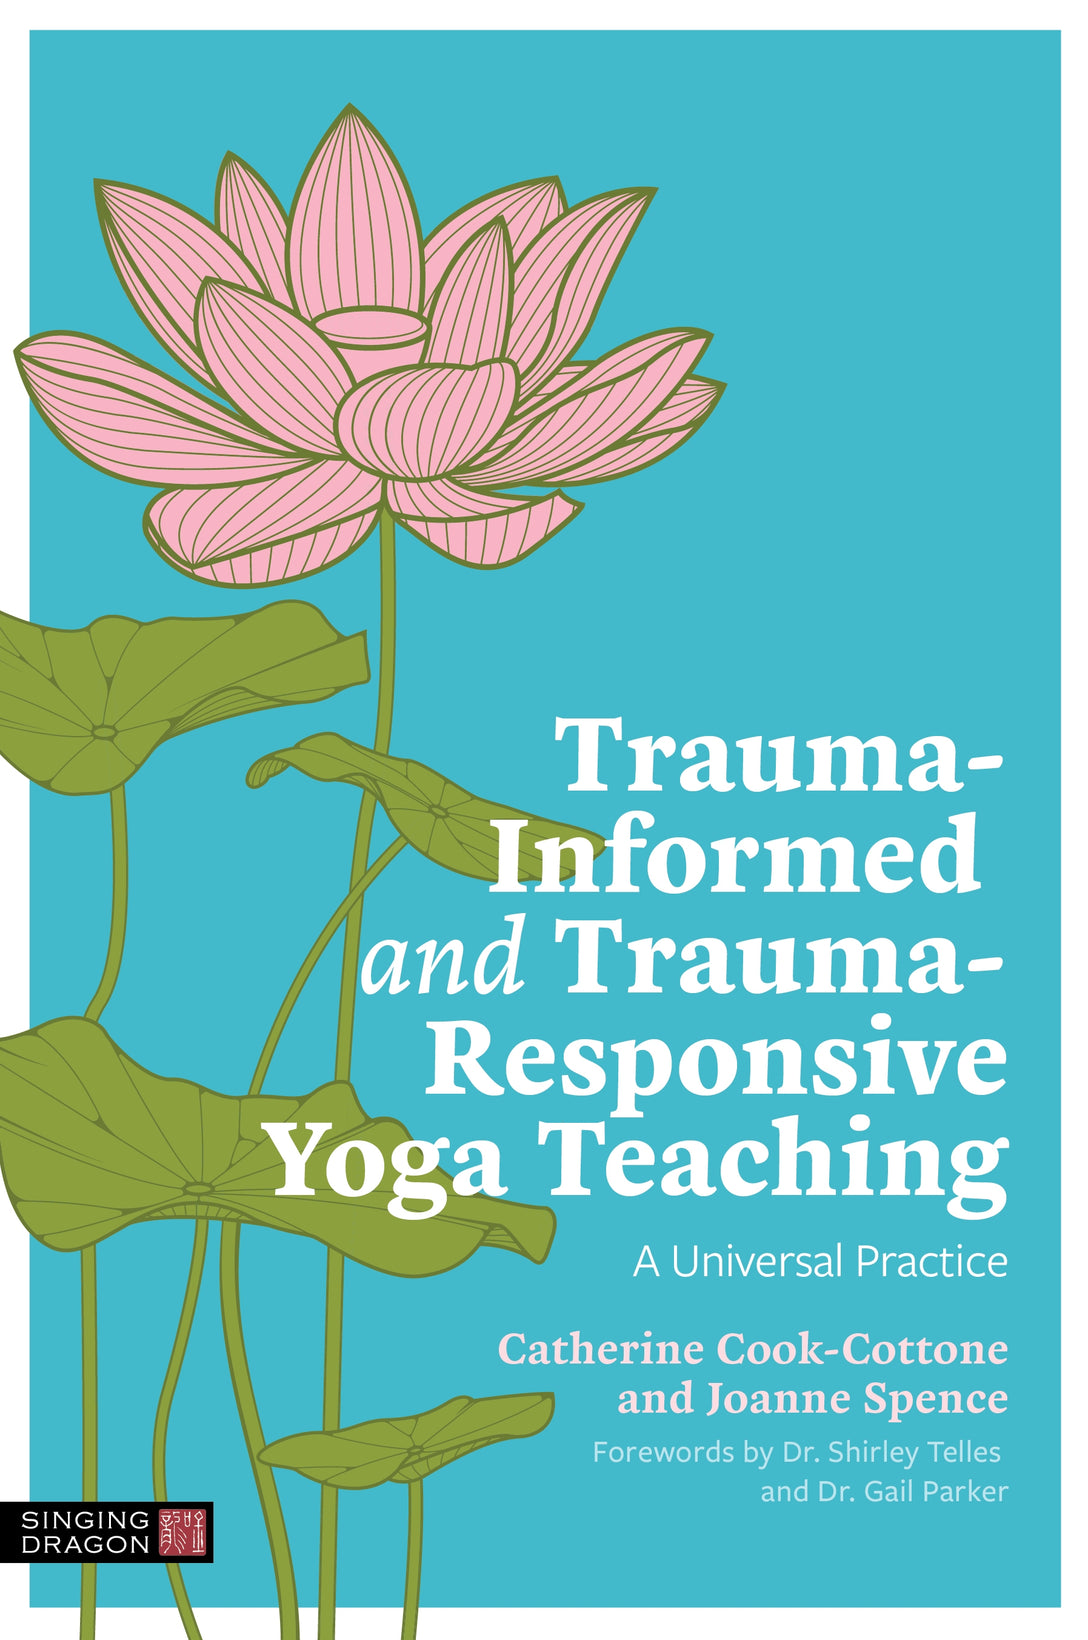 Trauma-Informed and Trauma-Responsive Yoga Teaching by Catherine Cook-Cottone, Joanne Spence, Shirley Telles, Gail Parker